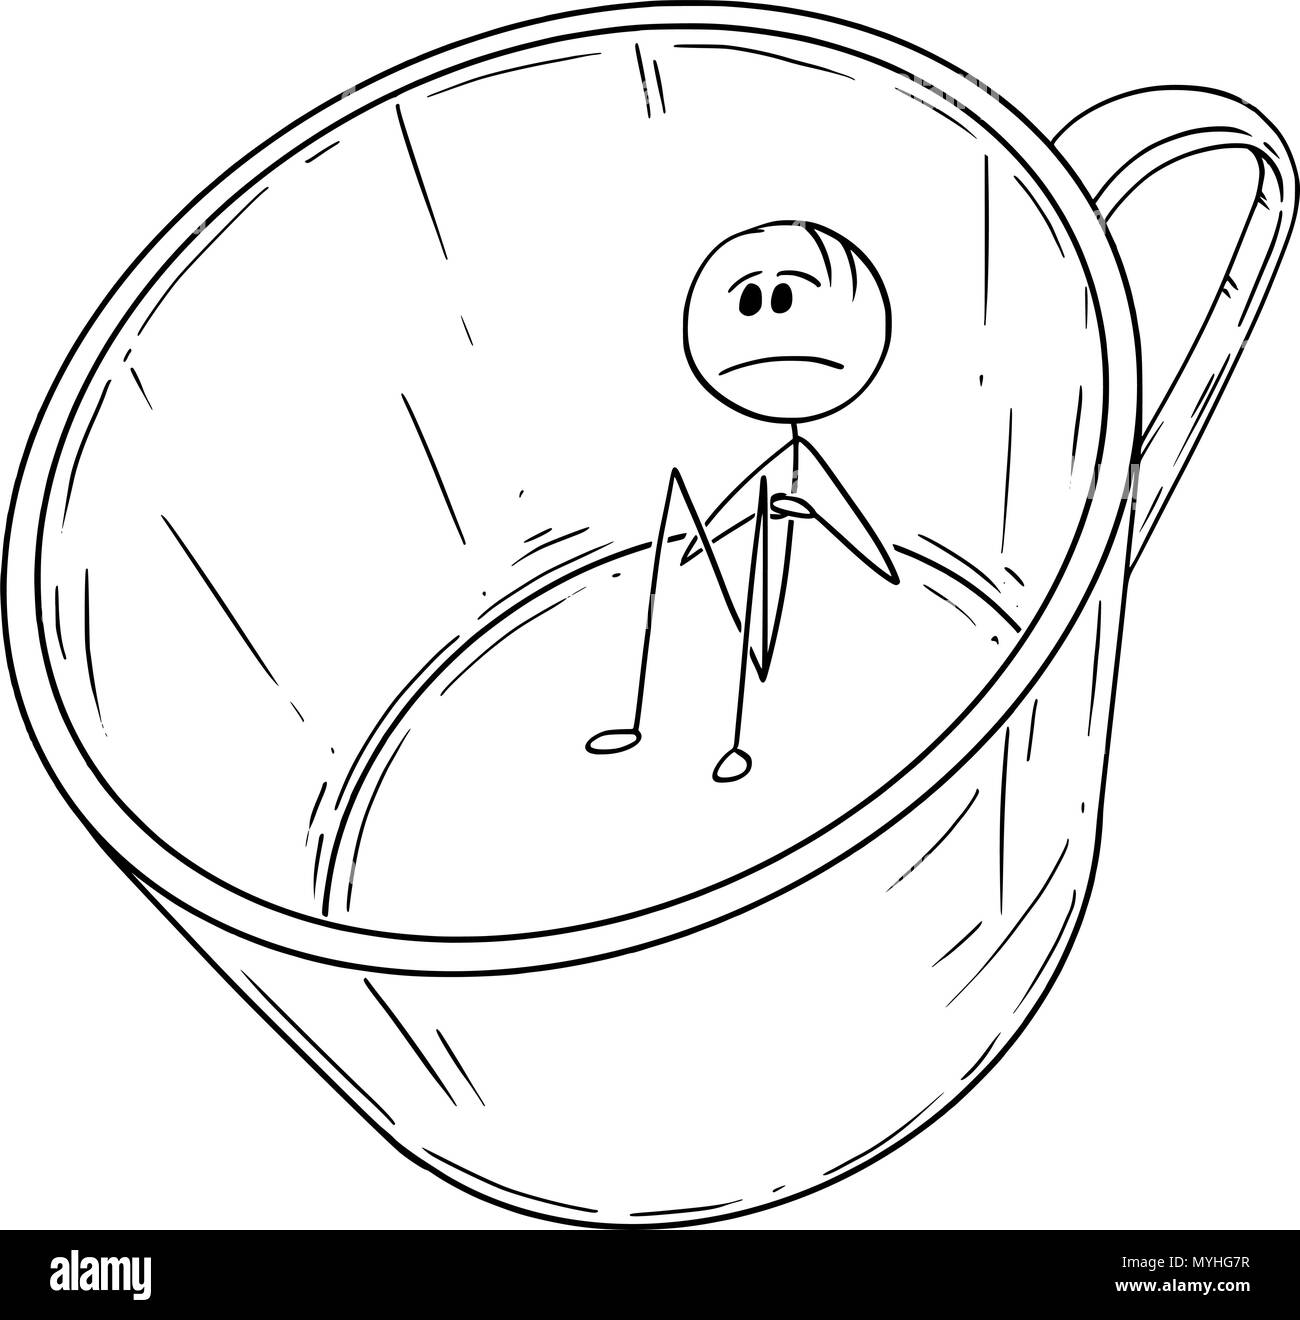 Cartoon of Sad and Depressed Man or Businessman Sitting in Empty Coffee Cup Stock Vector